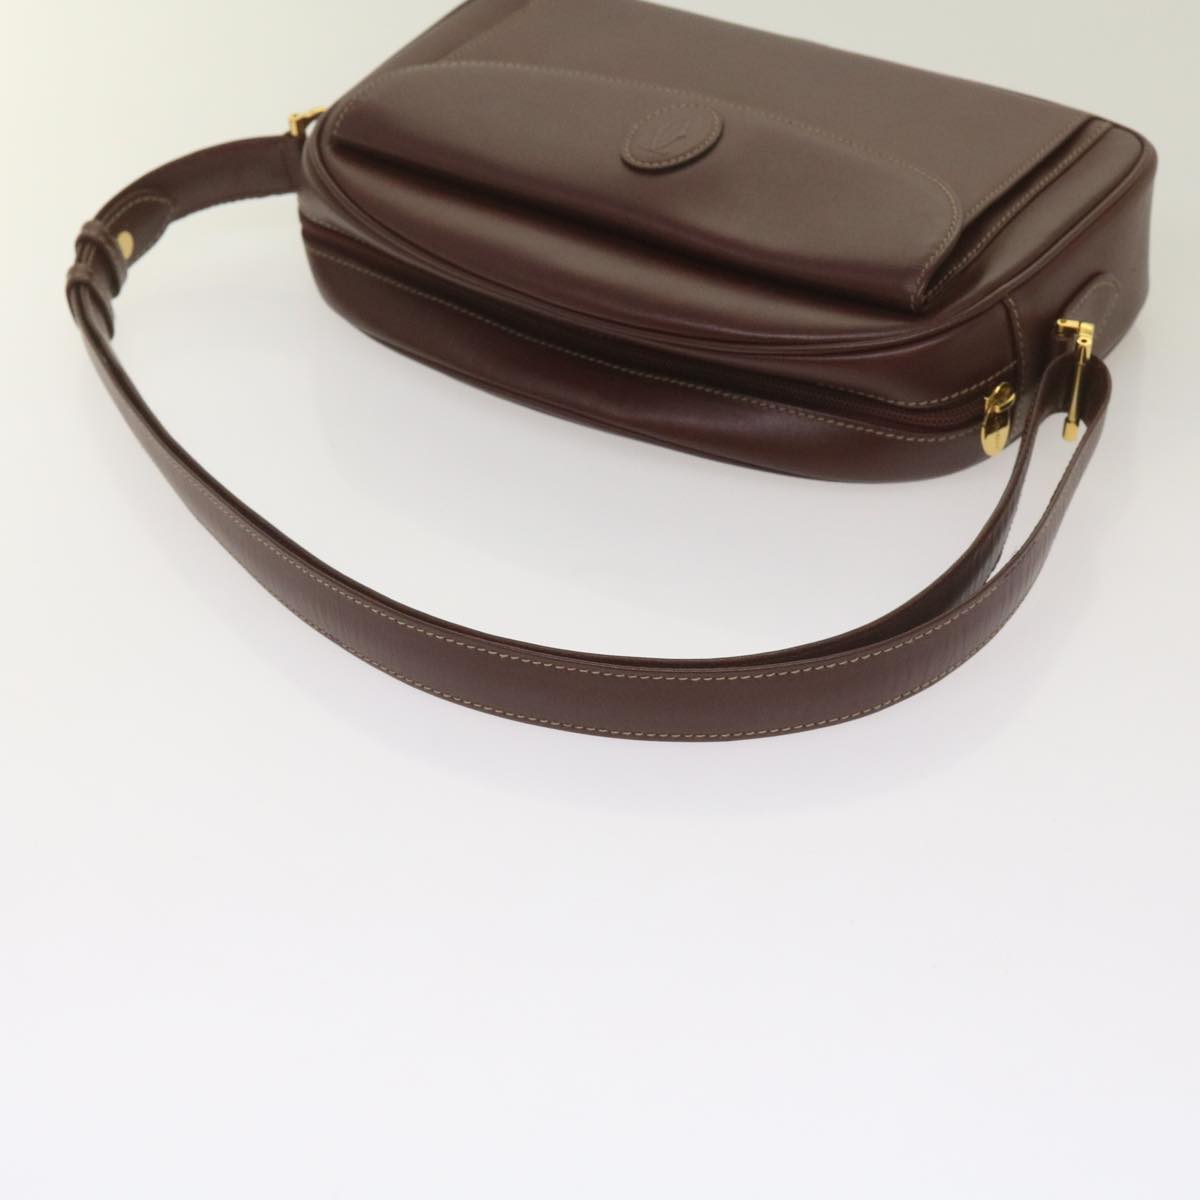 CARTIER Shoulder Bag Leather Wine Red Auth 68320